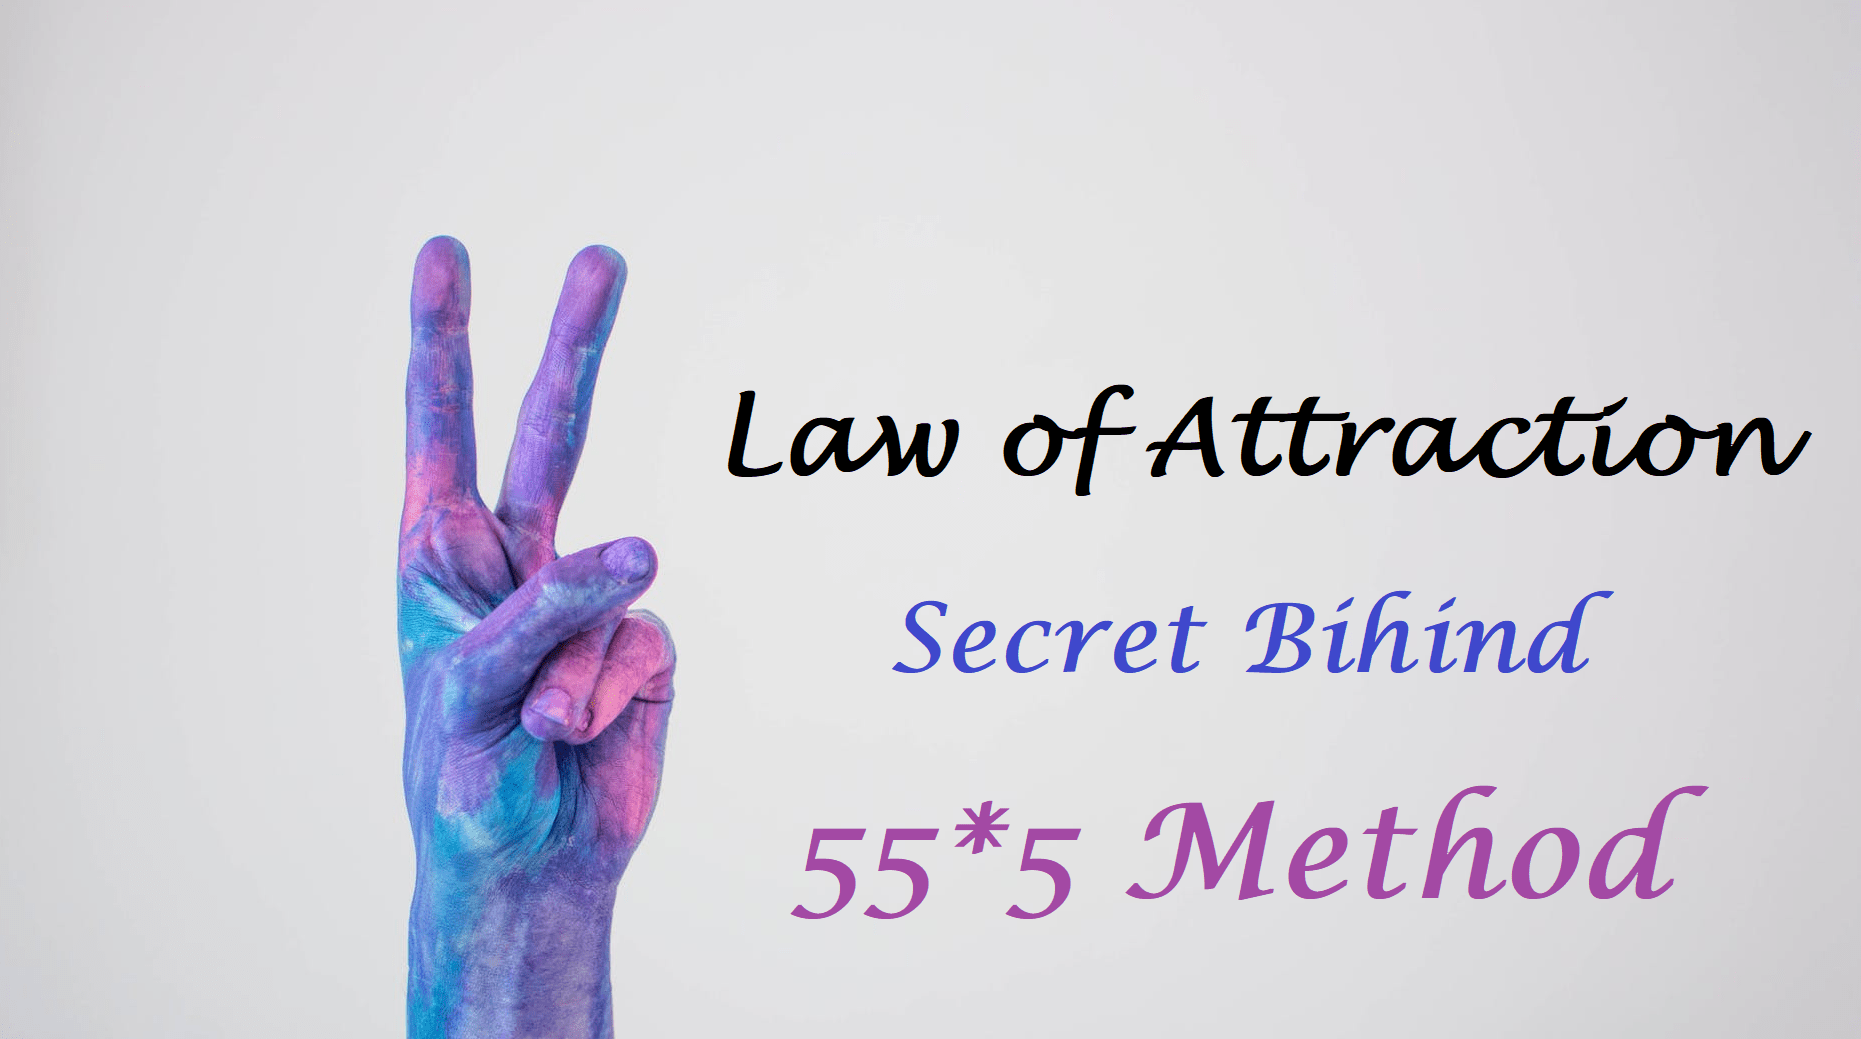 Law of Attraction 𝑺𝒆𝒄𝒓𝒆𝒕 𝒃𝒆𝒉𝒊𝒏𝒅 55*5 Method